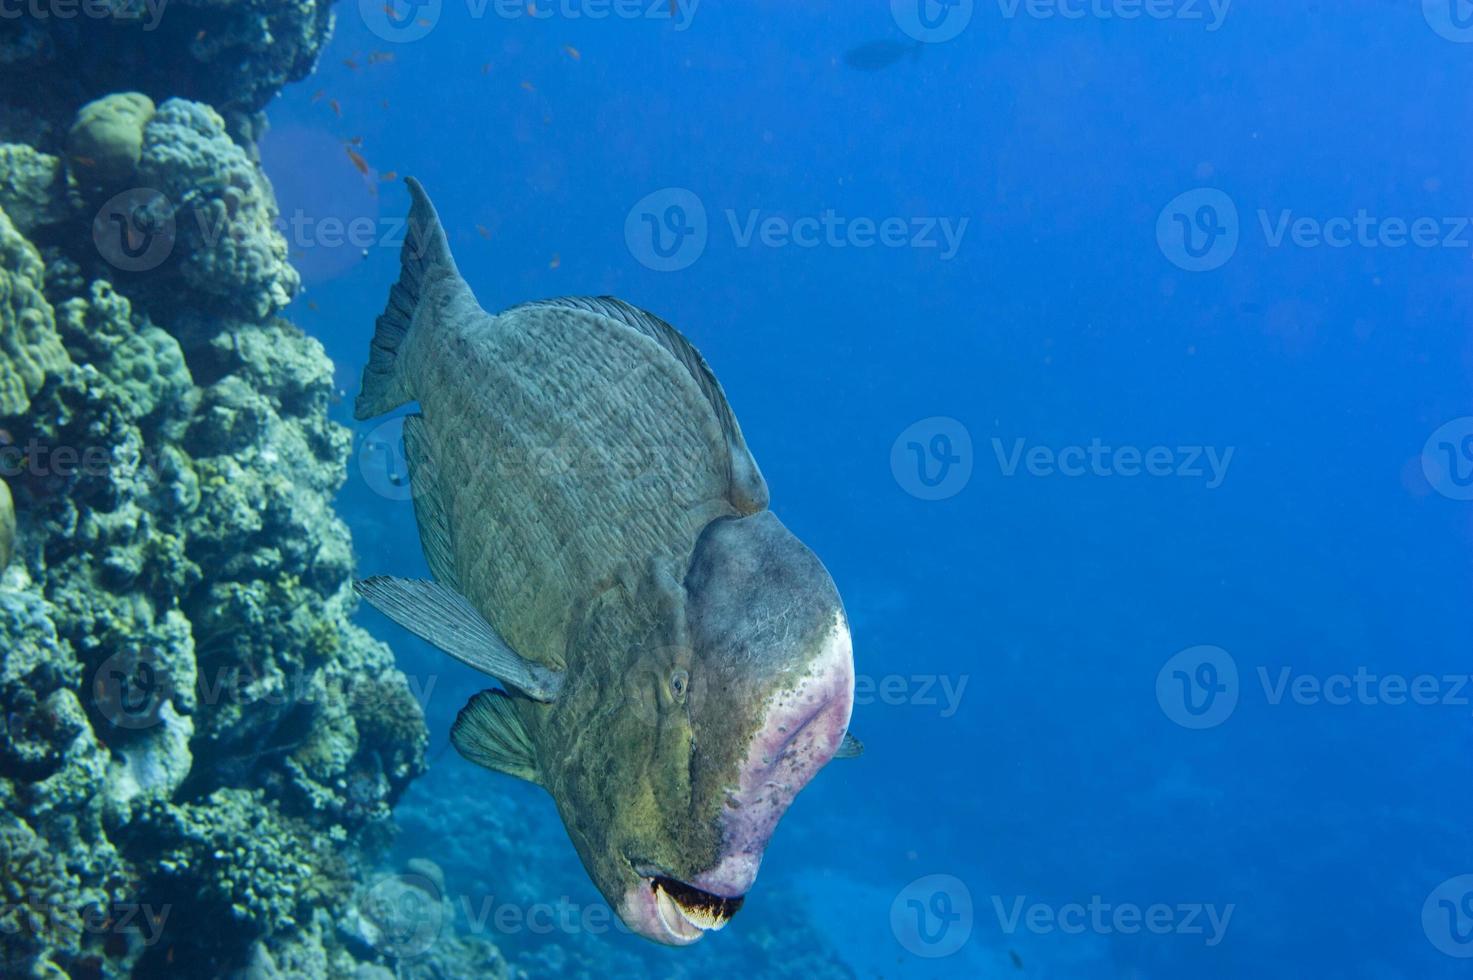 Bump head jack fish close up portrait in the reef background photo